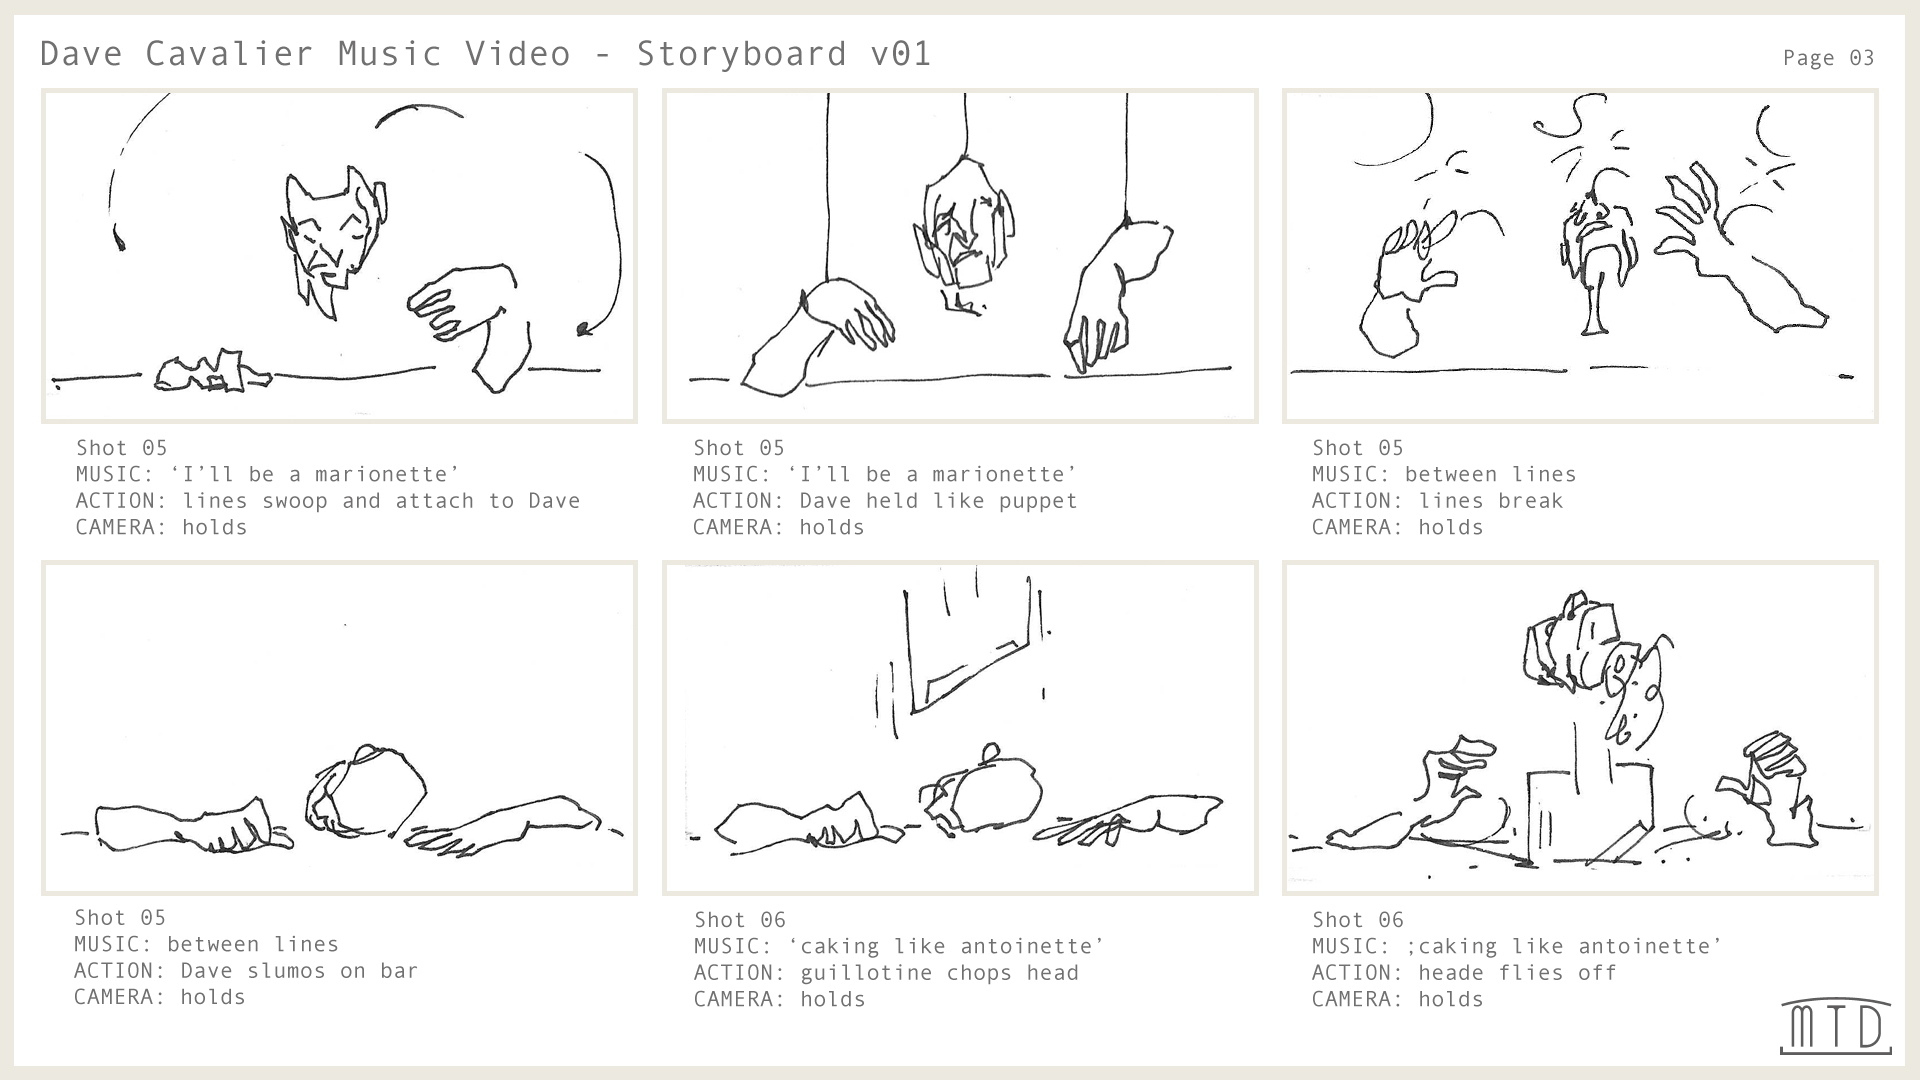 The Hold storyboard page 3